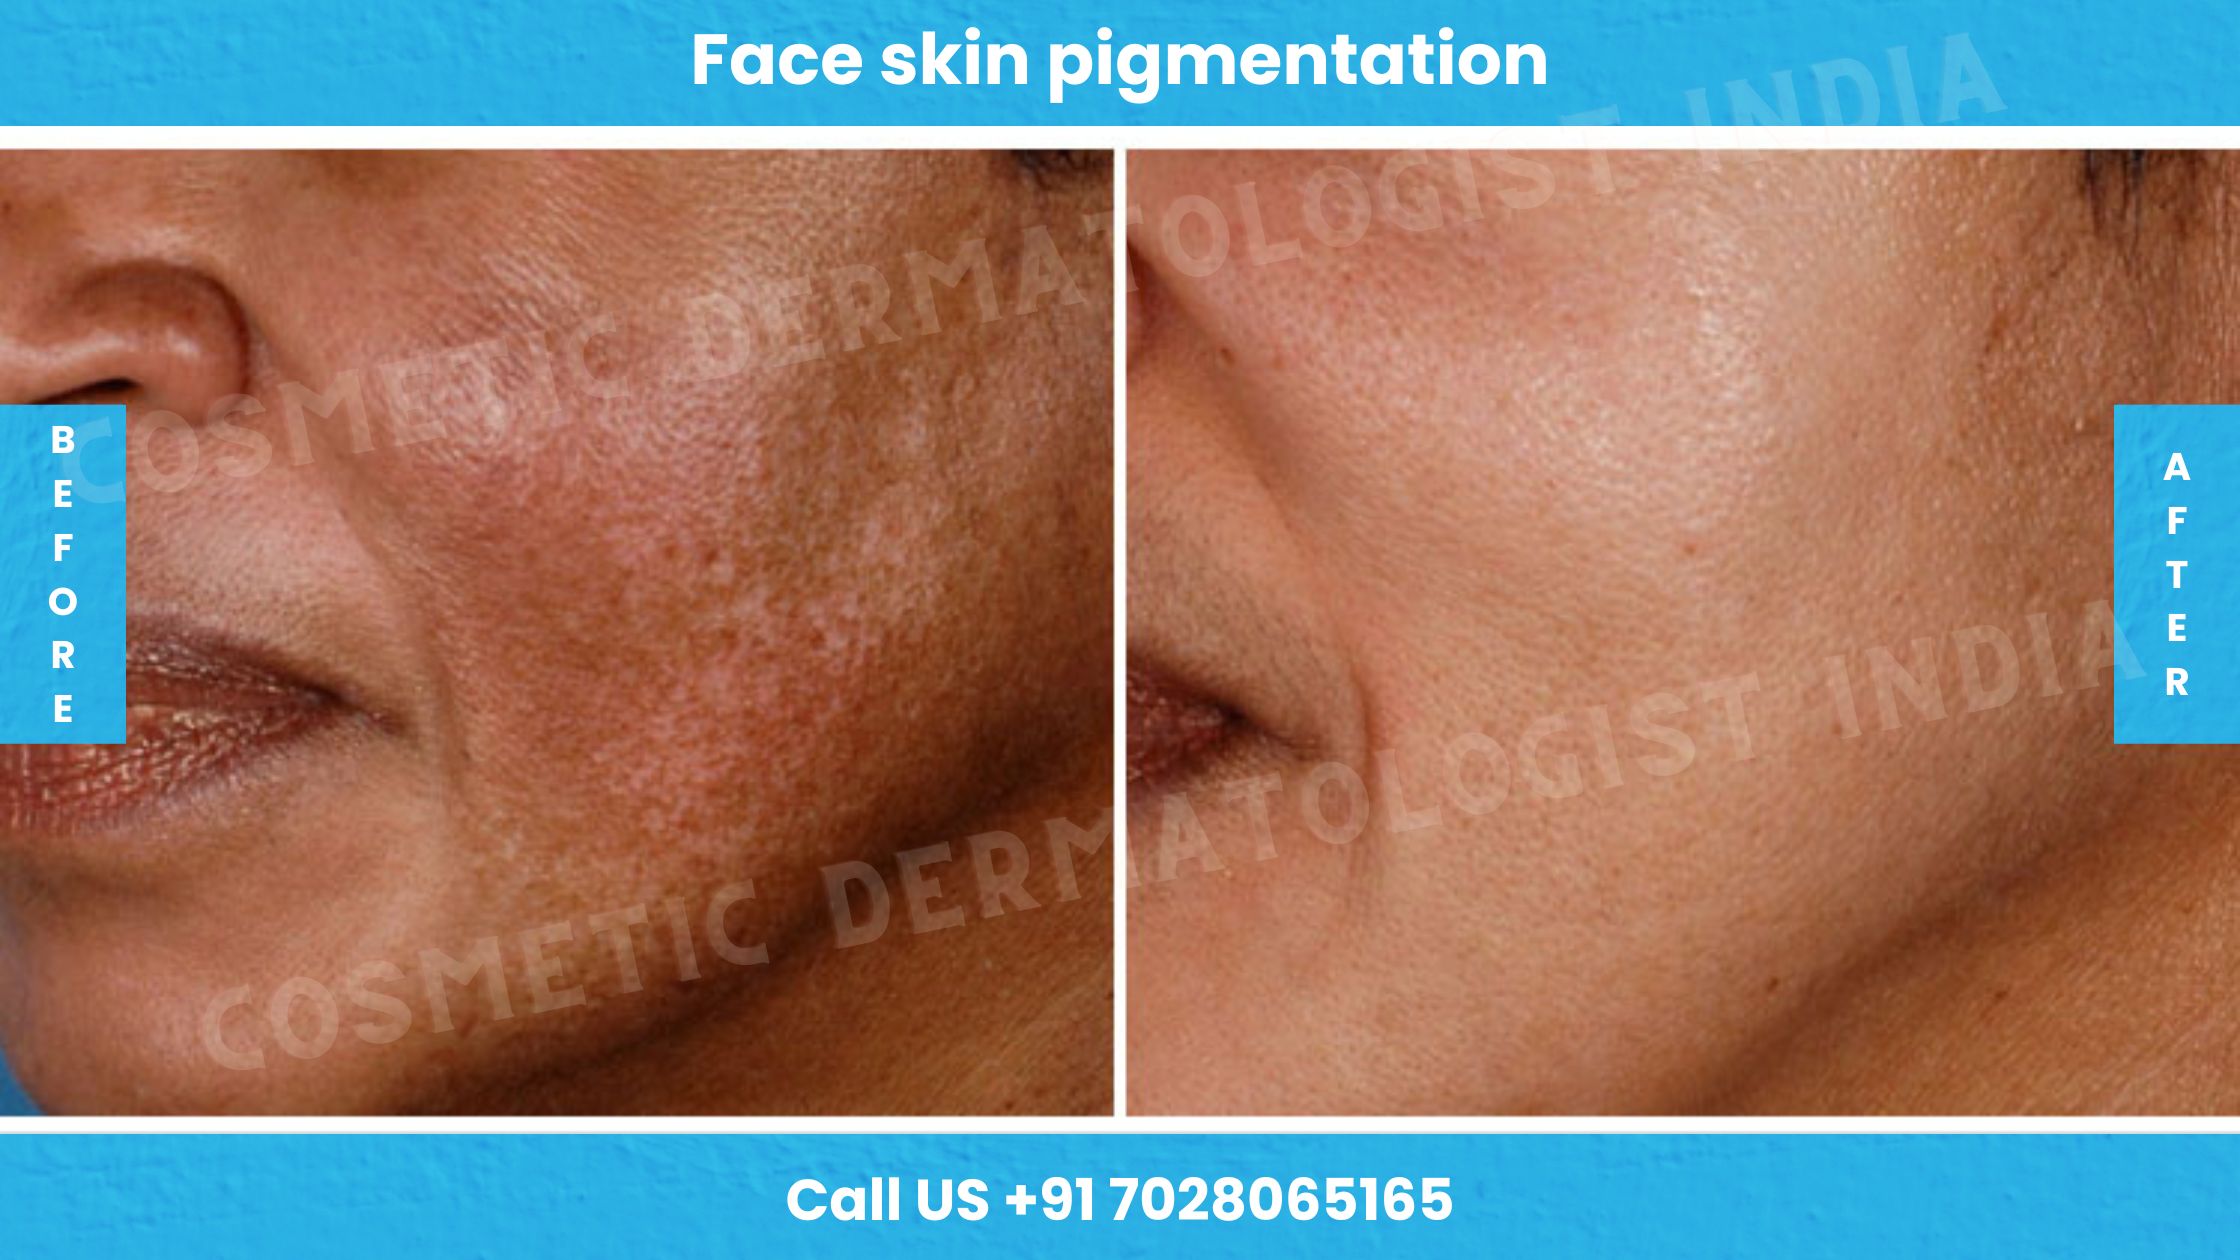 Before and After images of Face Skin Pigmentation